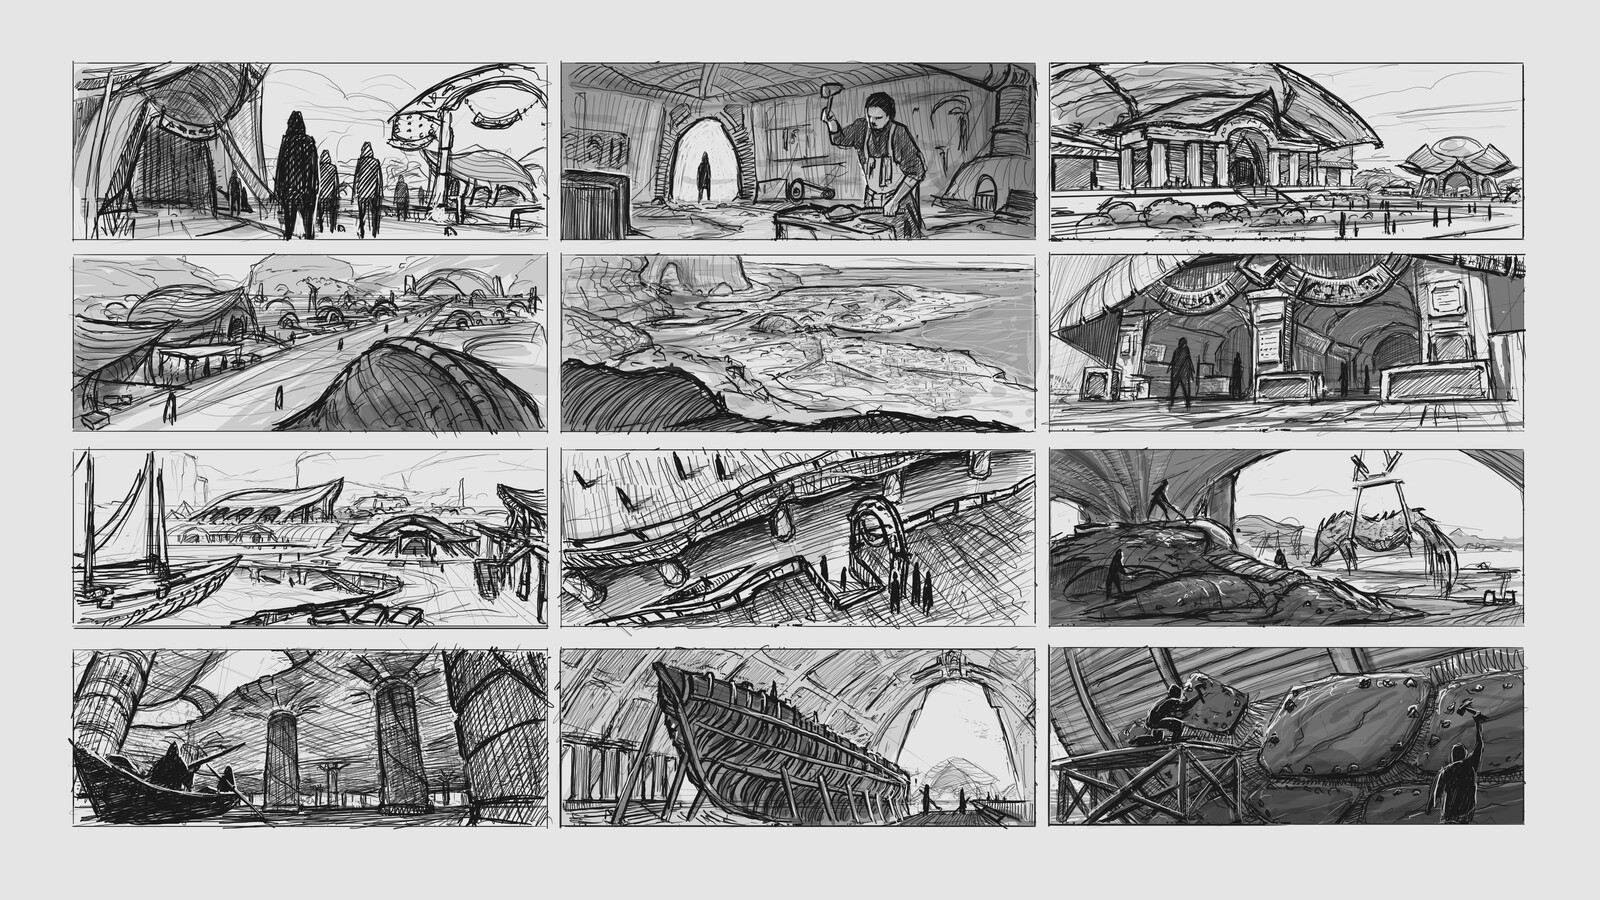 Thumbnail sketches of different shots across the city.